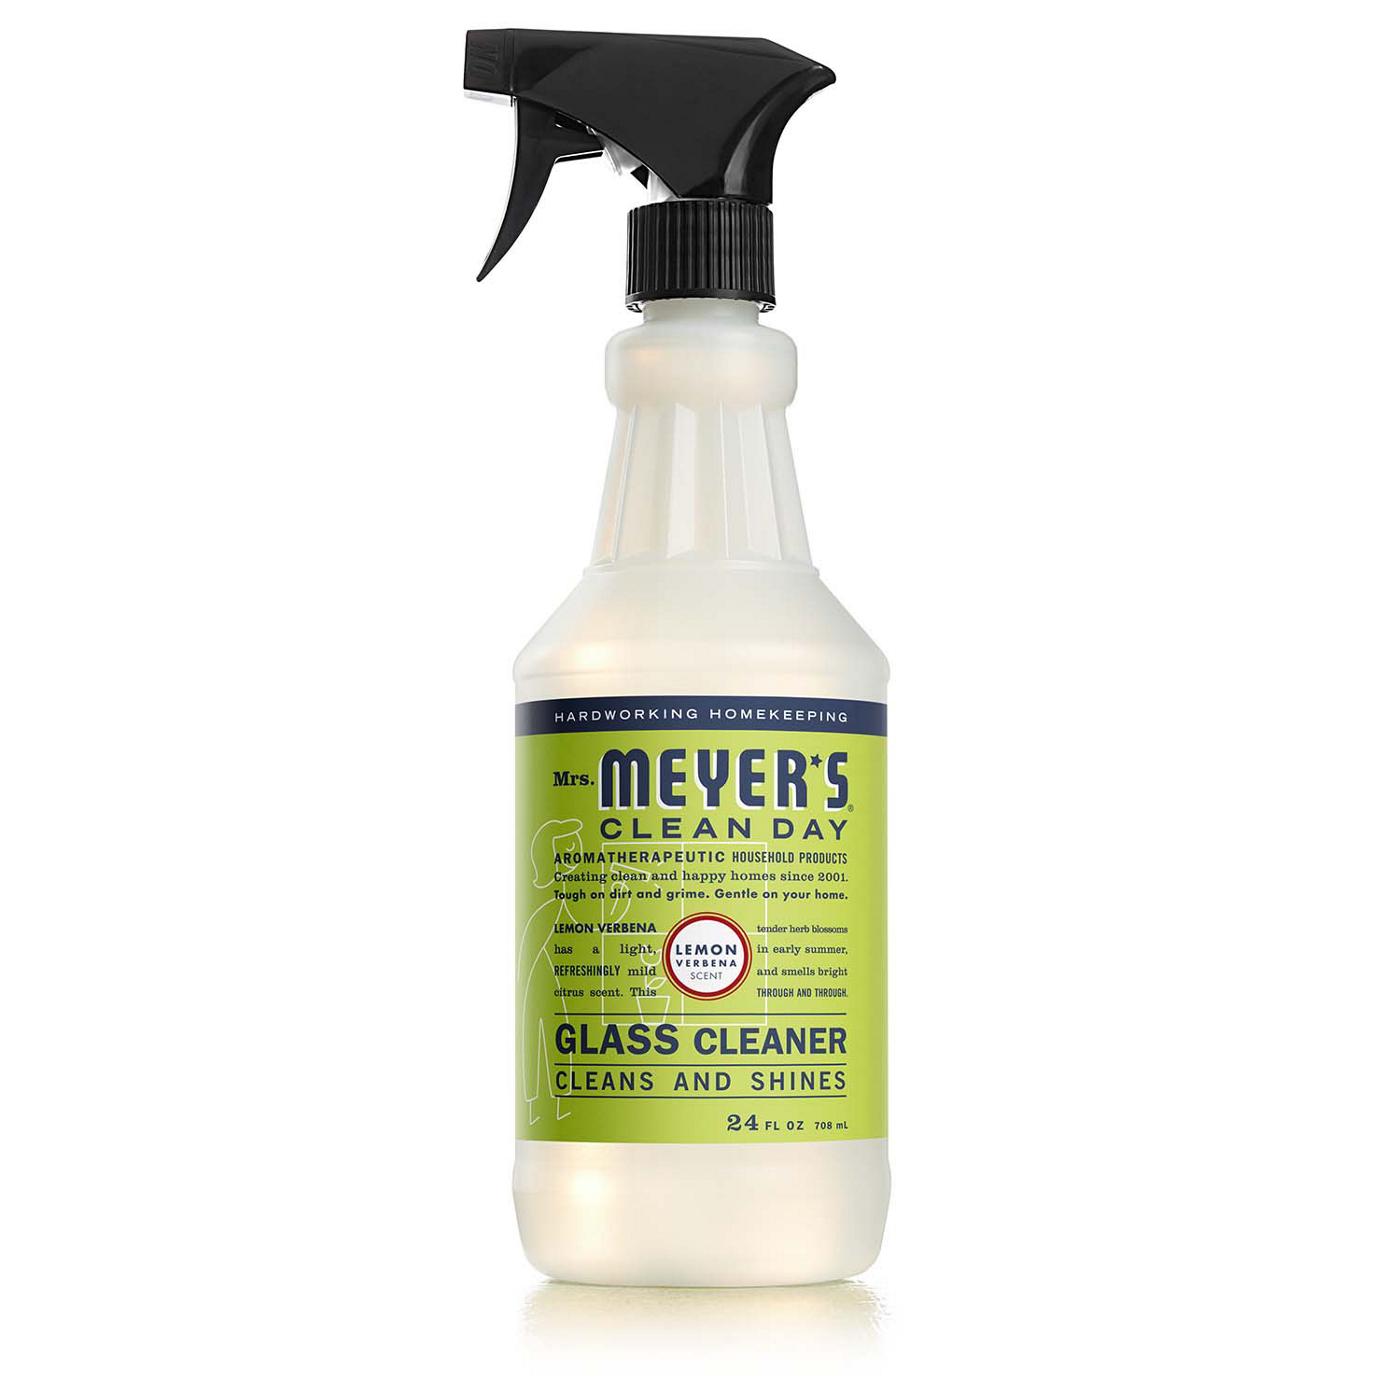 Mrs. Meyer's Clean Day Lemon Verbena Scent Glass Cleaner Spray; image 1 of 4